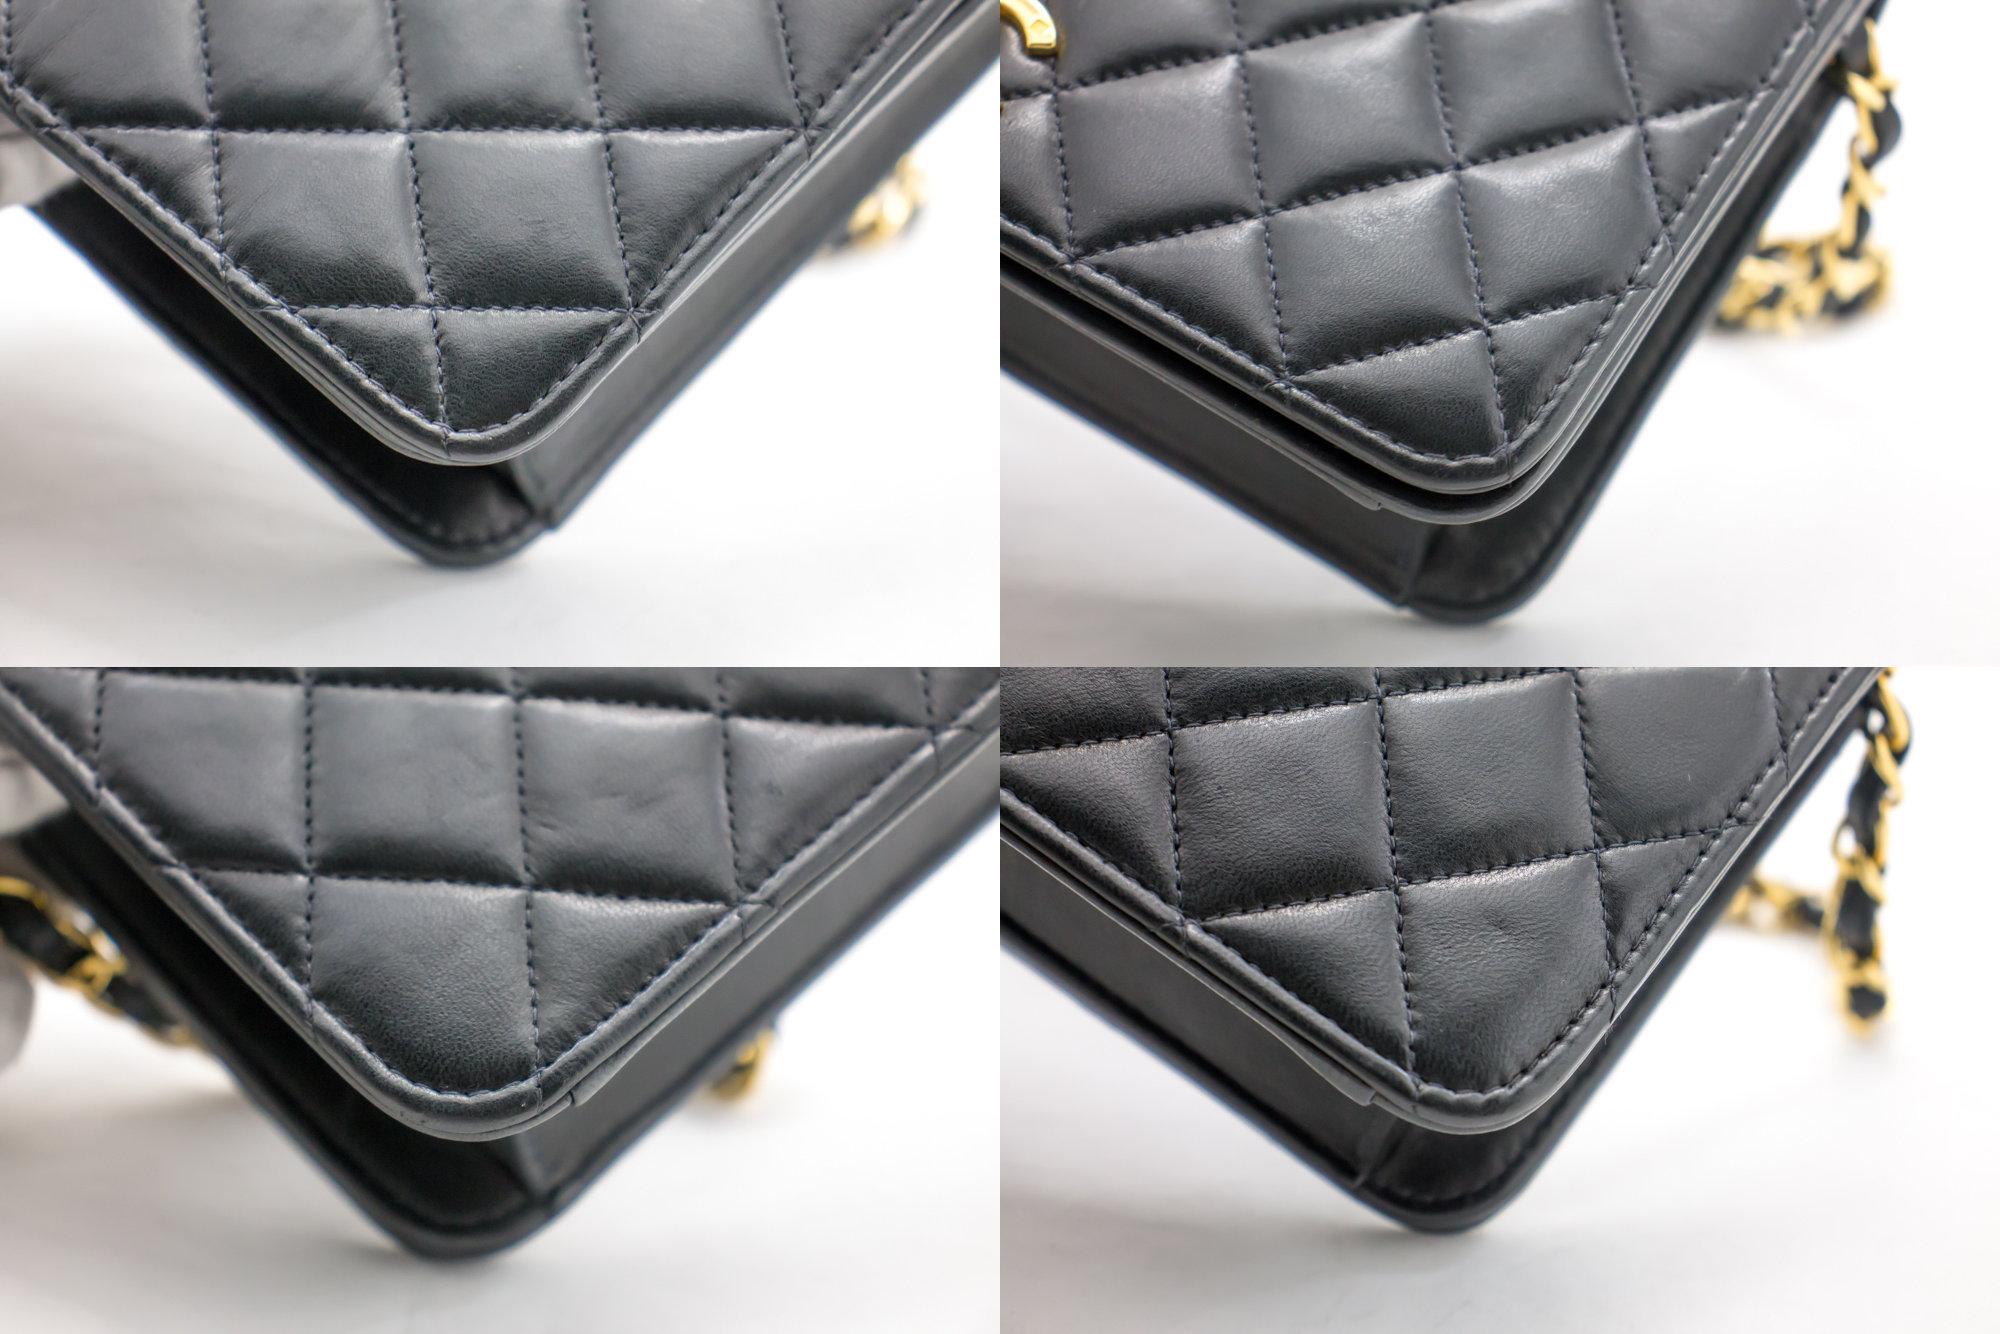 CHANEL Full Flap Small Chain Shoulder Bag Black Clutch Quilted 2